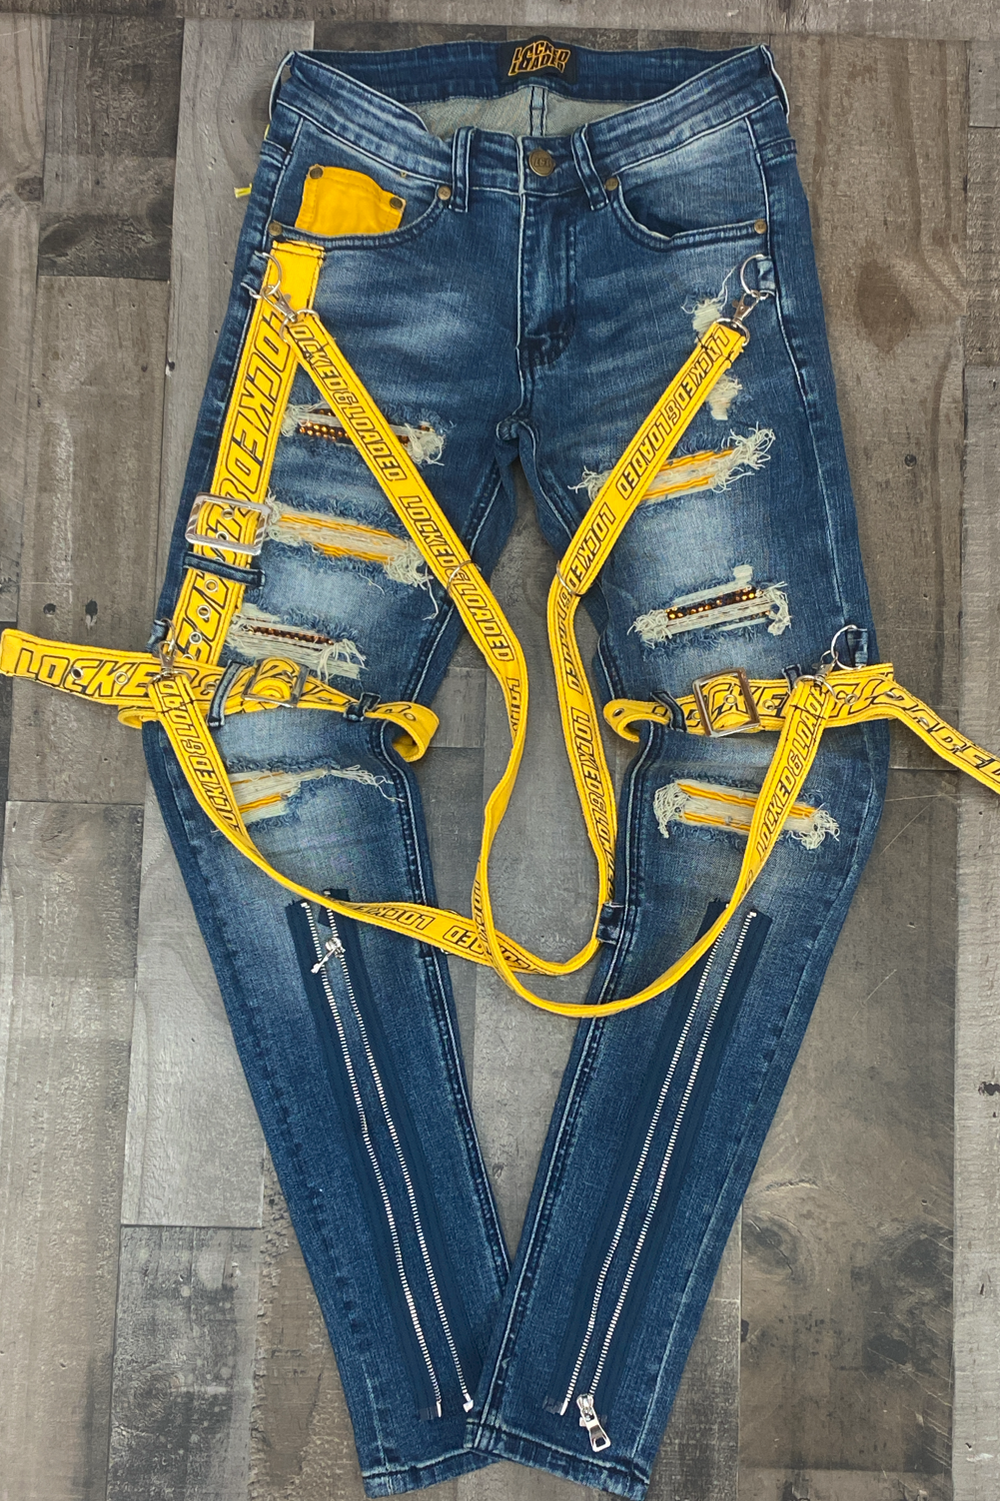 Locked Loaded- locked & loaded strapped jeans